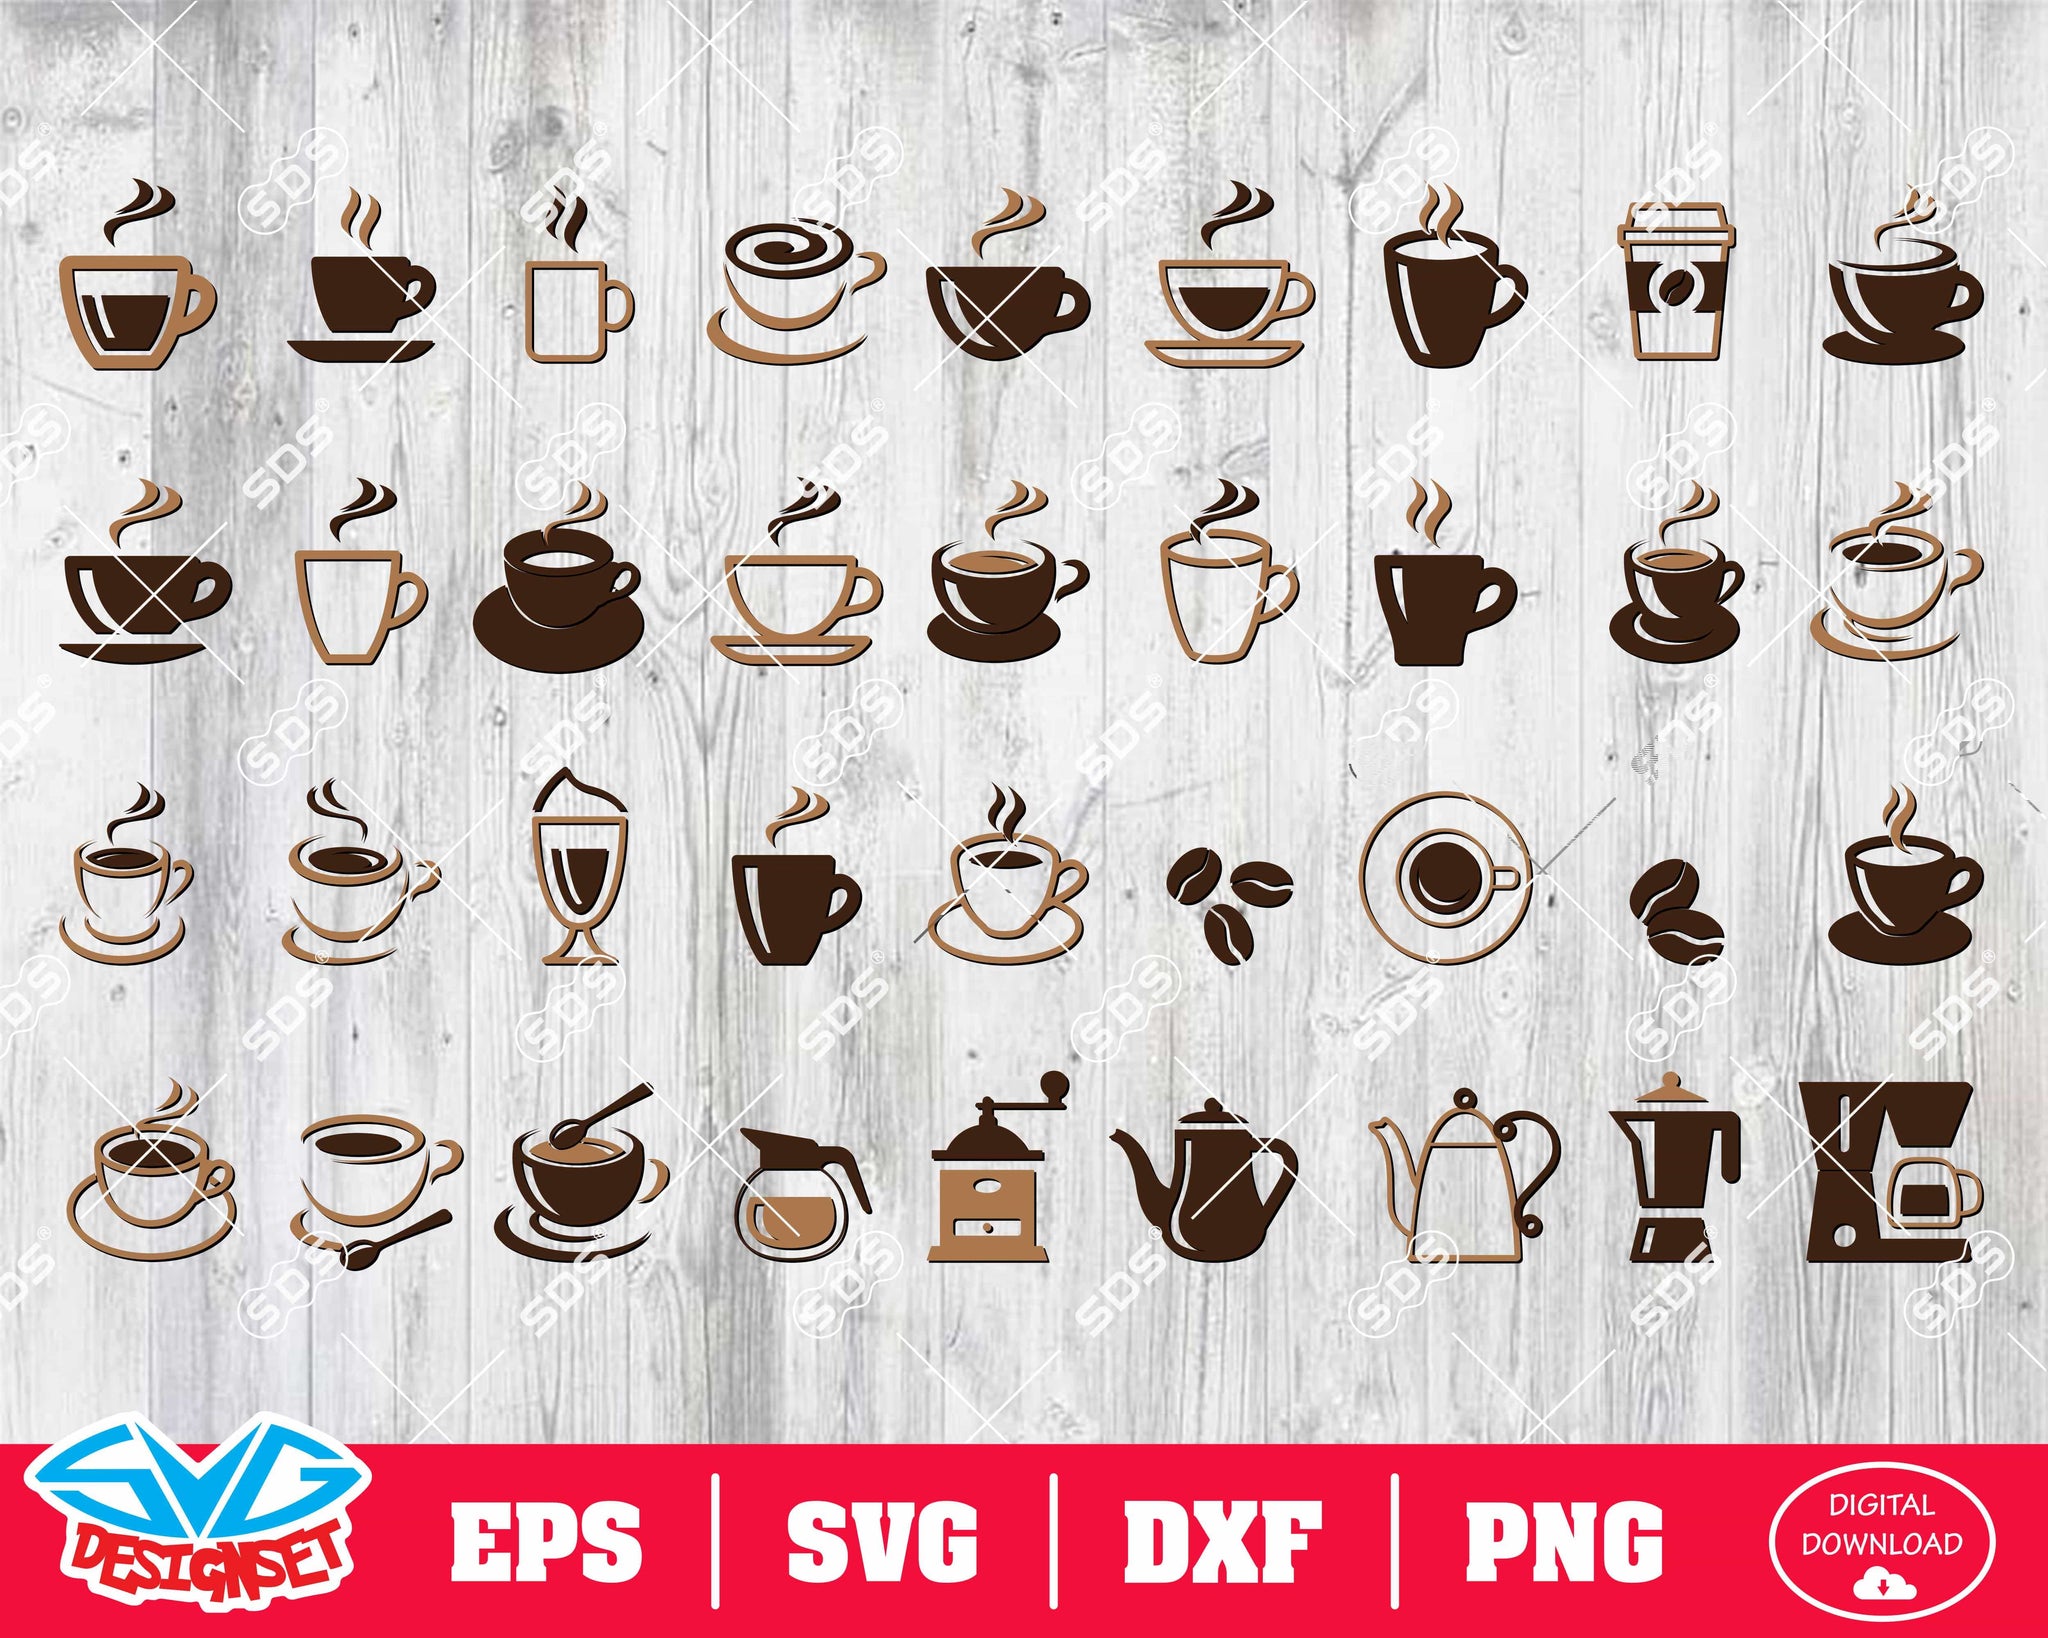 Coffee Svg, Dxf, Eps, Png, Clipart, Silhouette and Cutfiles #2 - SVGDesignSets